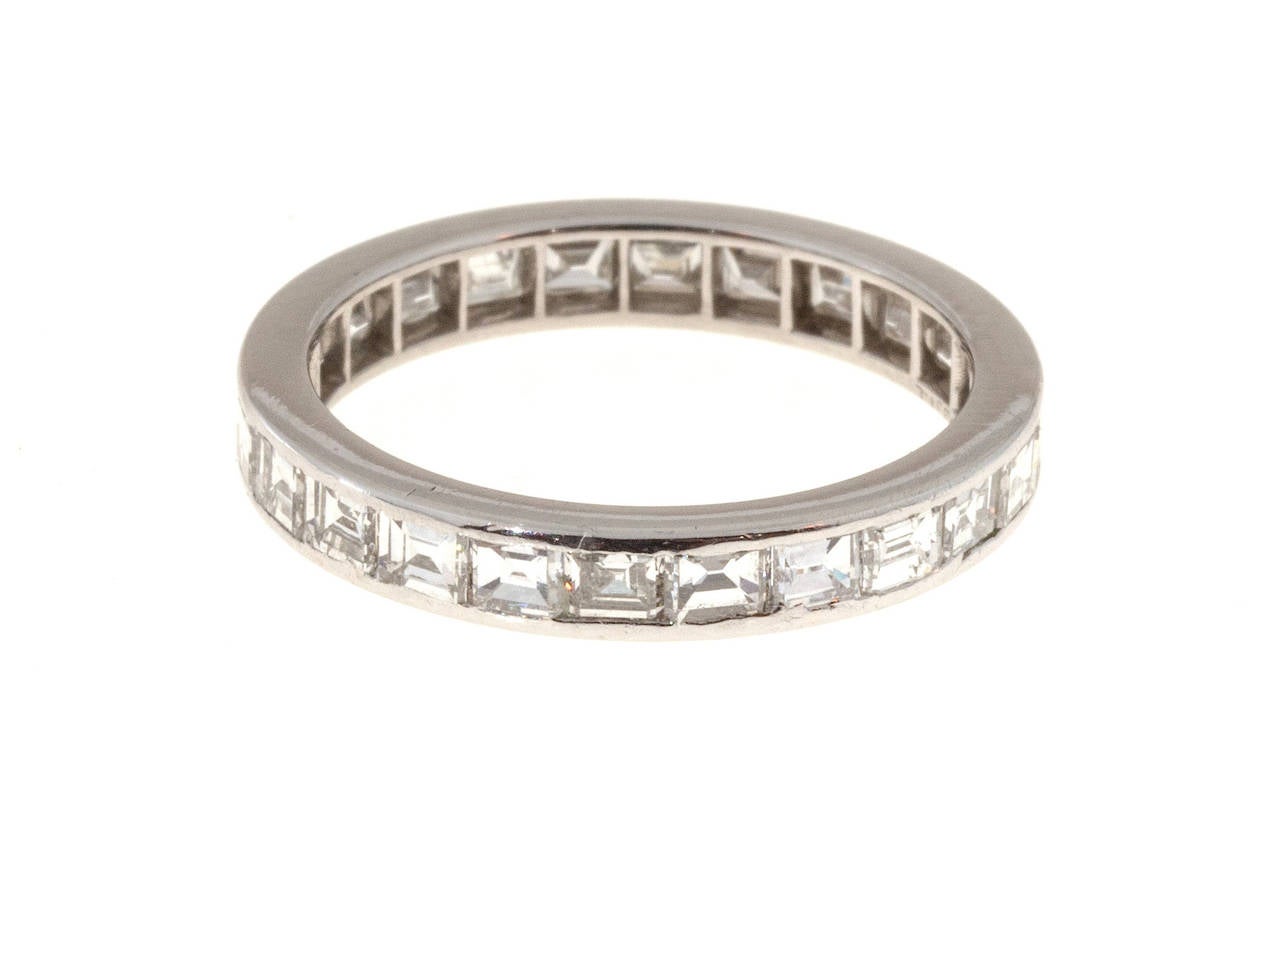 Original 1942 Tiffany & Co. platinum square diamond Eternity ring from 1942 set with F, VVS diamond.

24 square diamonds, approx. total weight 2.70cts, F, VVS
Stamped: Tiffany & Co Plat
3.2 grams
Tested: Platinum
Engraved on side: Oct 14,